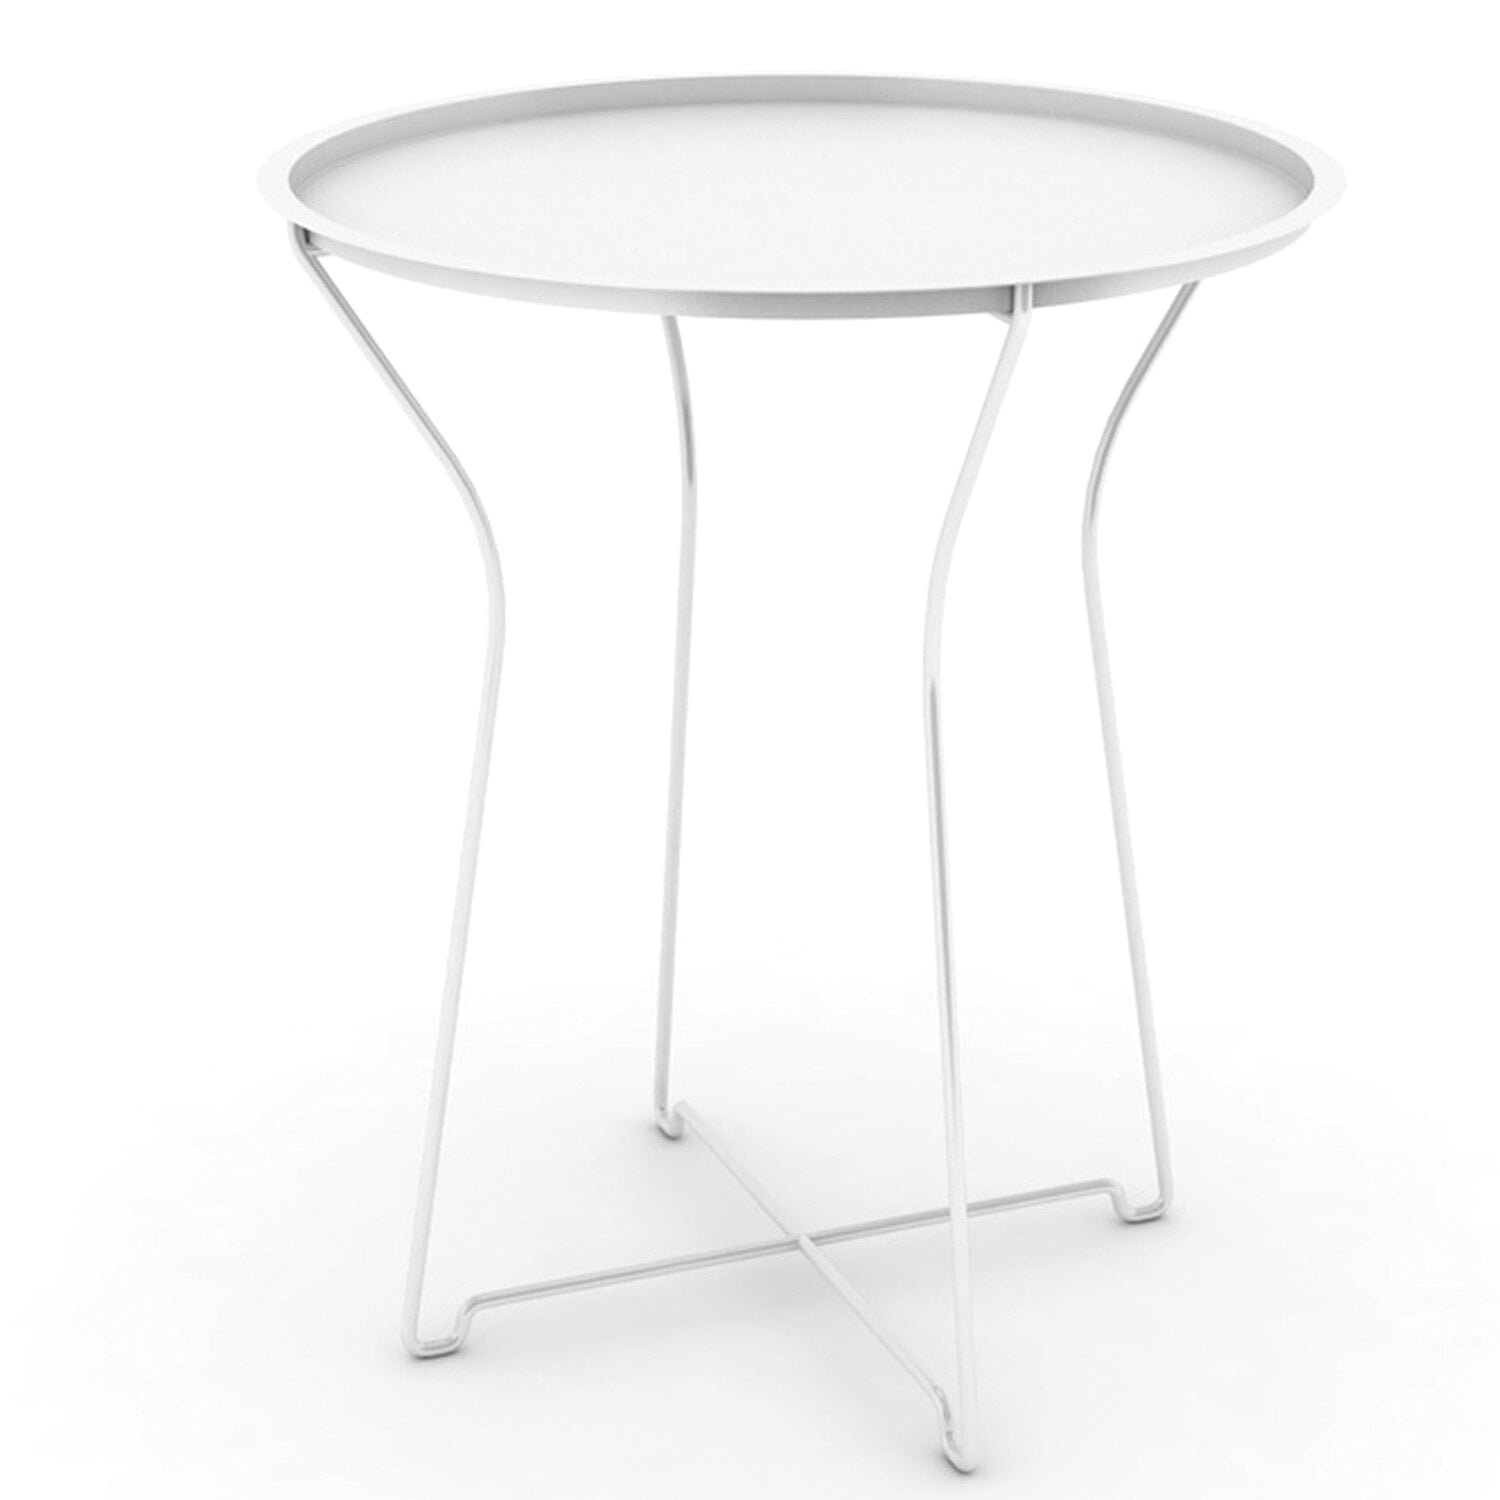 Picture of Atlantic 38435983 Metal Folding Metal Side Table Tray, White - Round